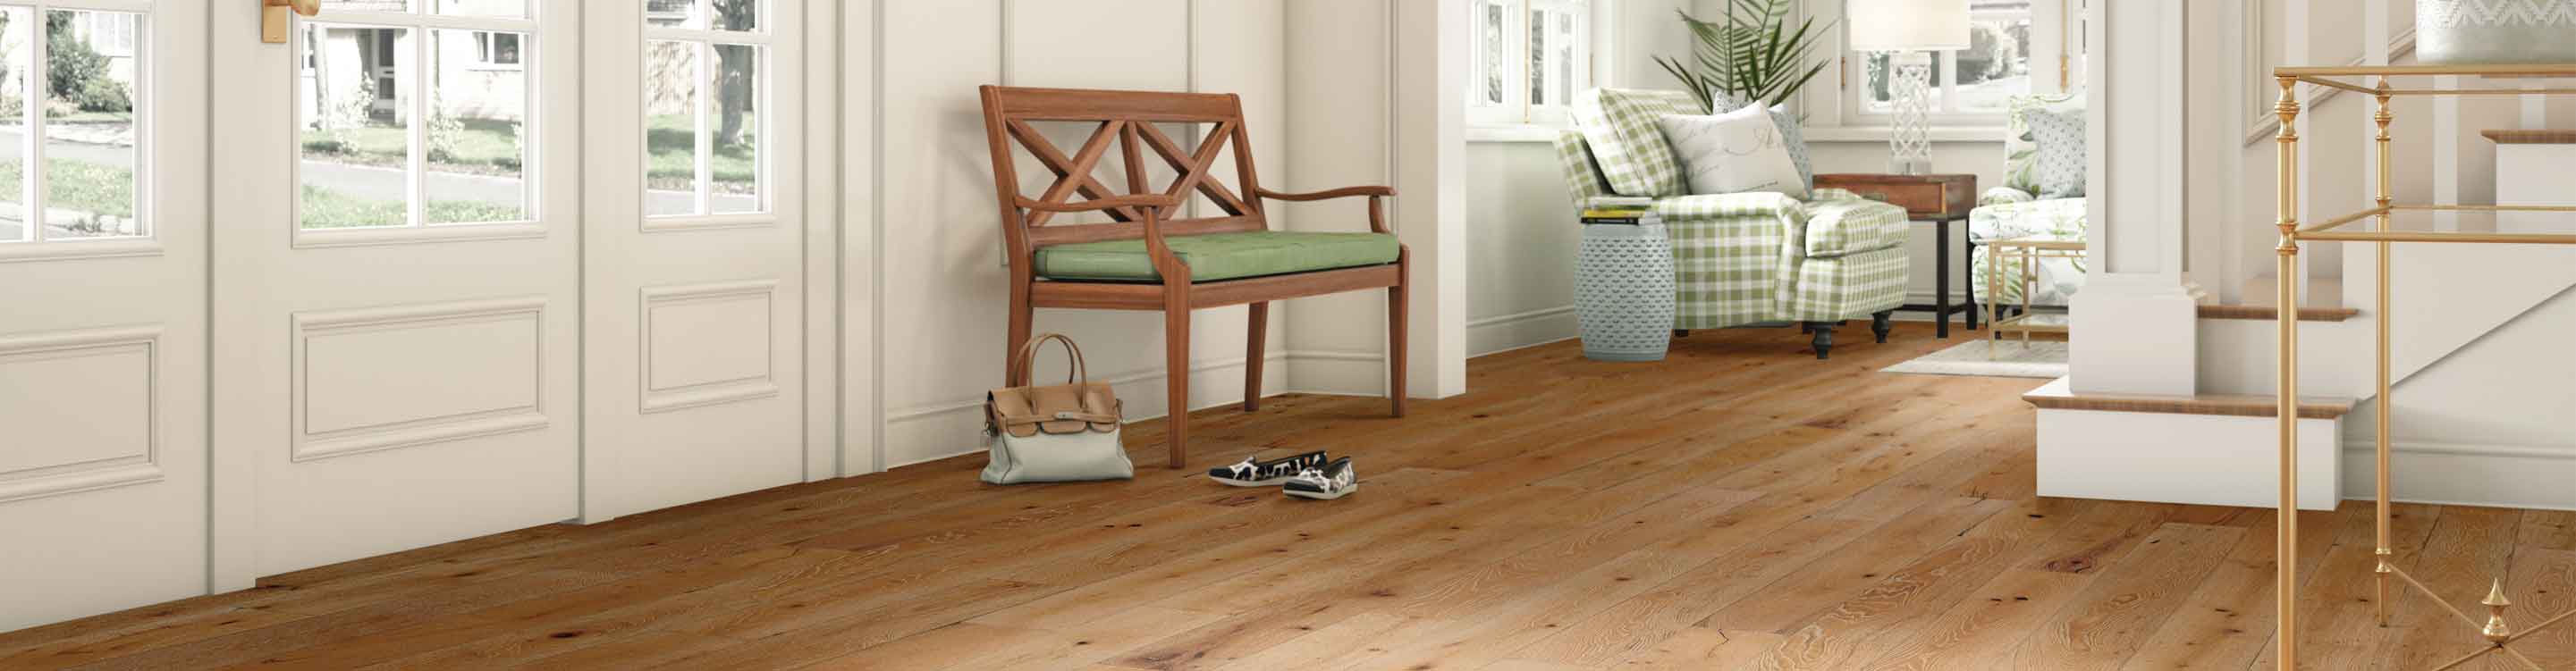 Light hardwood entryway with green cushion bench 